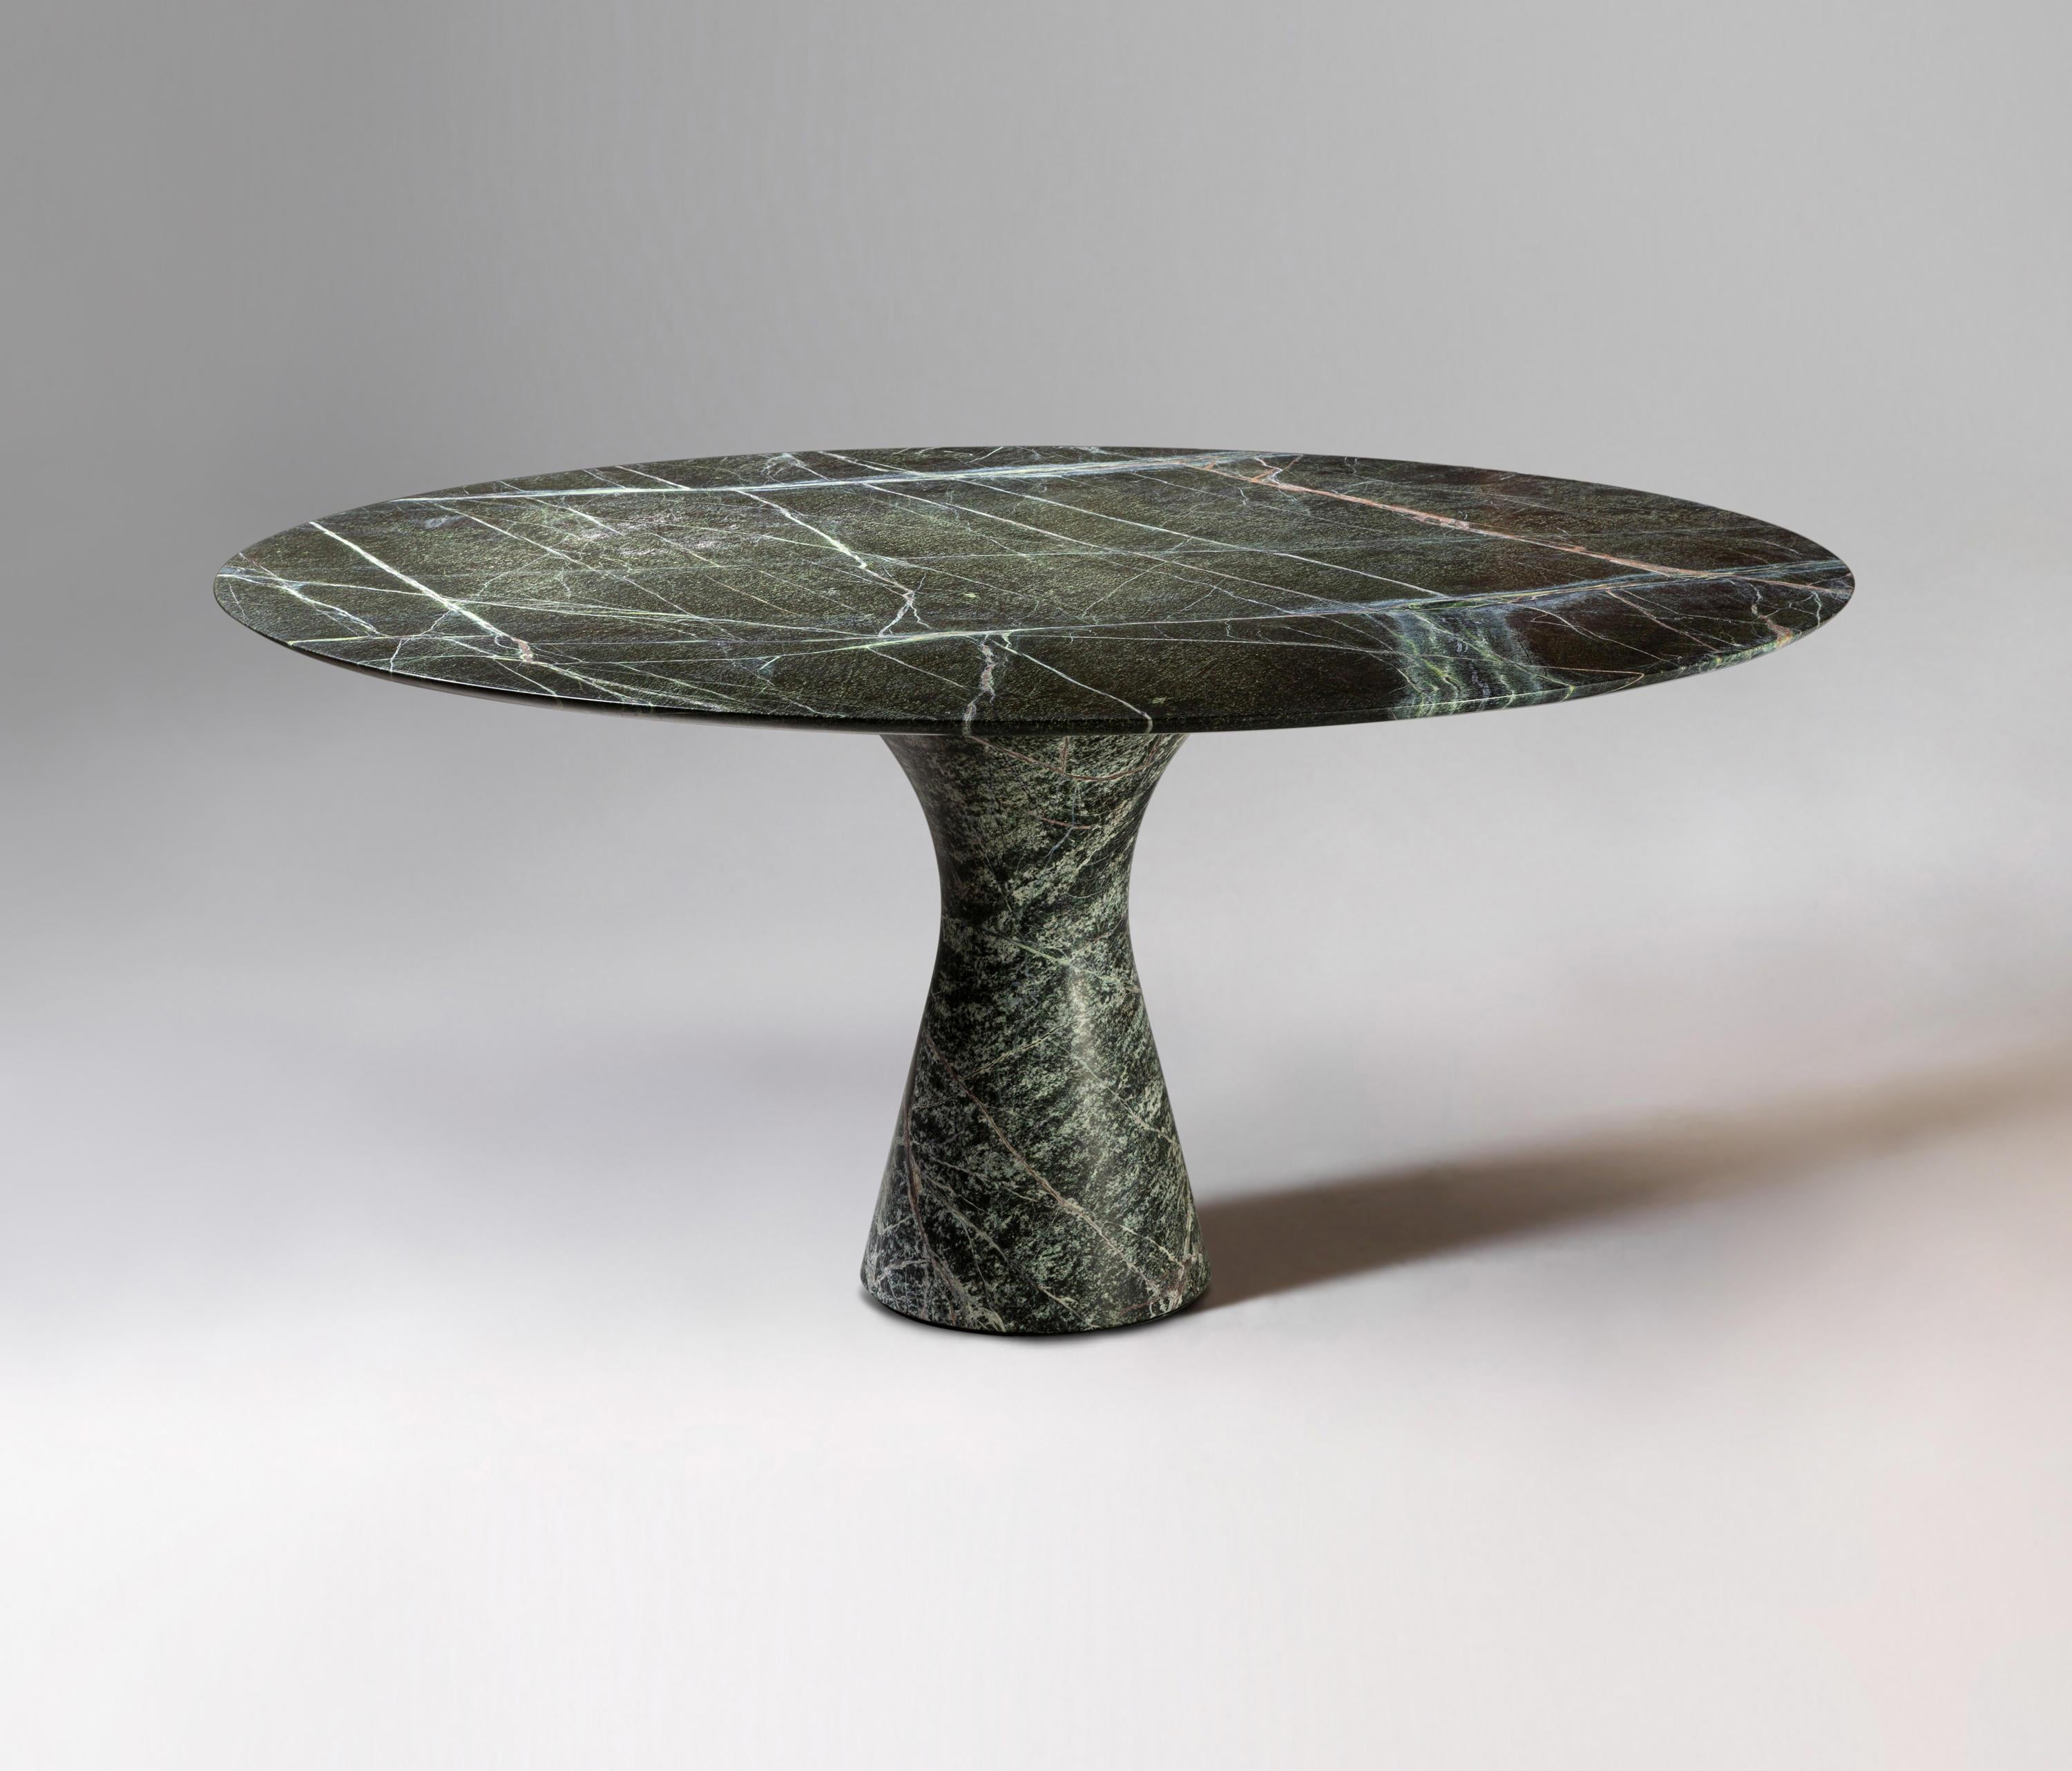 Picasso Green Refined Contemporary marble low round table 27/100
Dimensions: 100 x H 27 cm
Materials: Picasso Green marble
Available in Kyknos, Grafite, Travertino Rosso, Grey Saint Laurent, Picasso green, Port Saint Laurent, Travertino Silver,